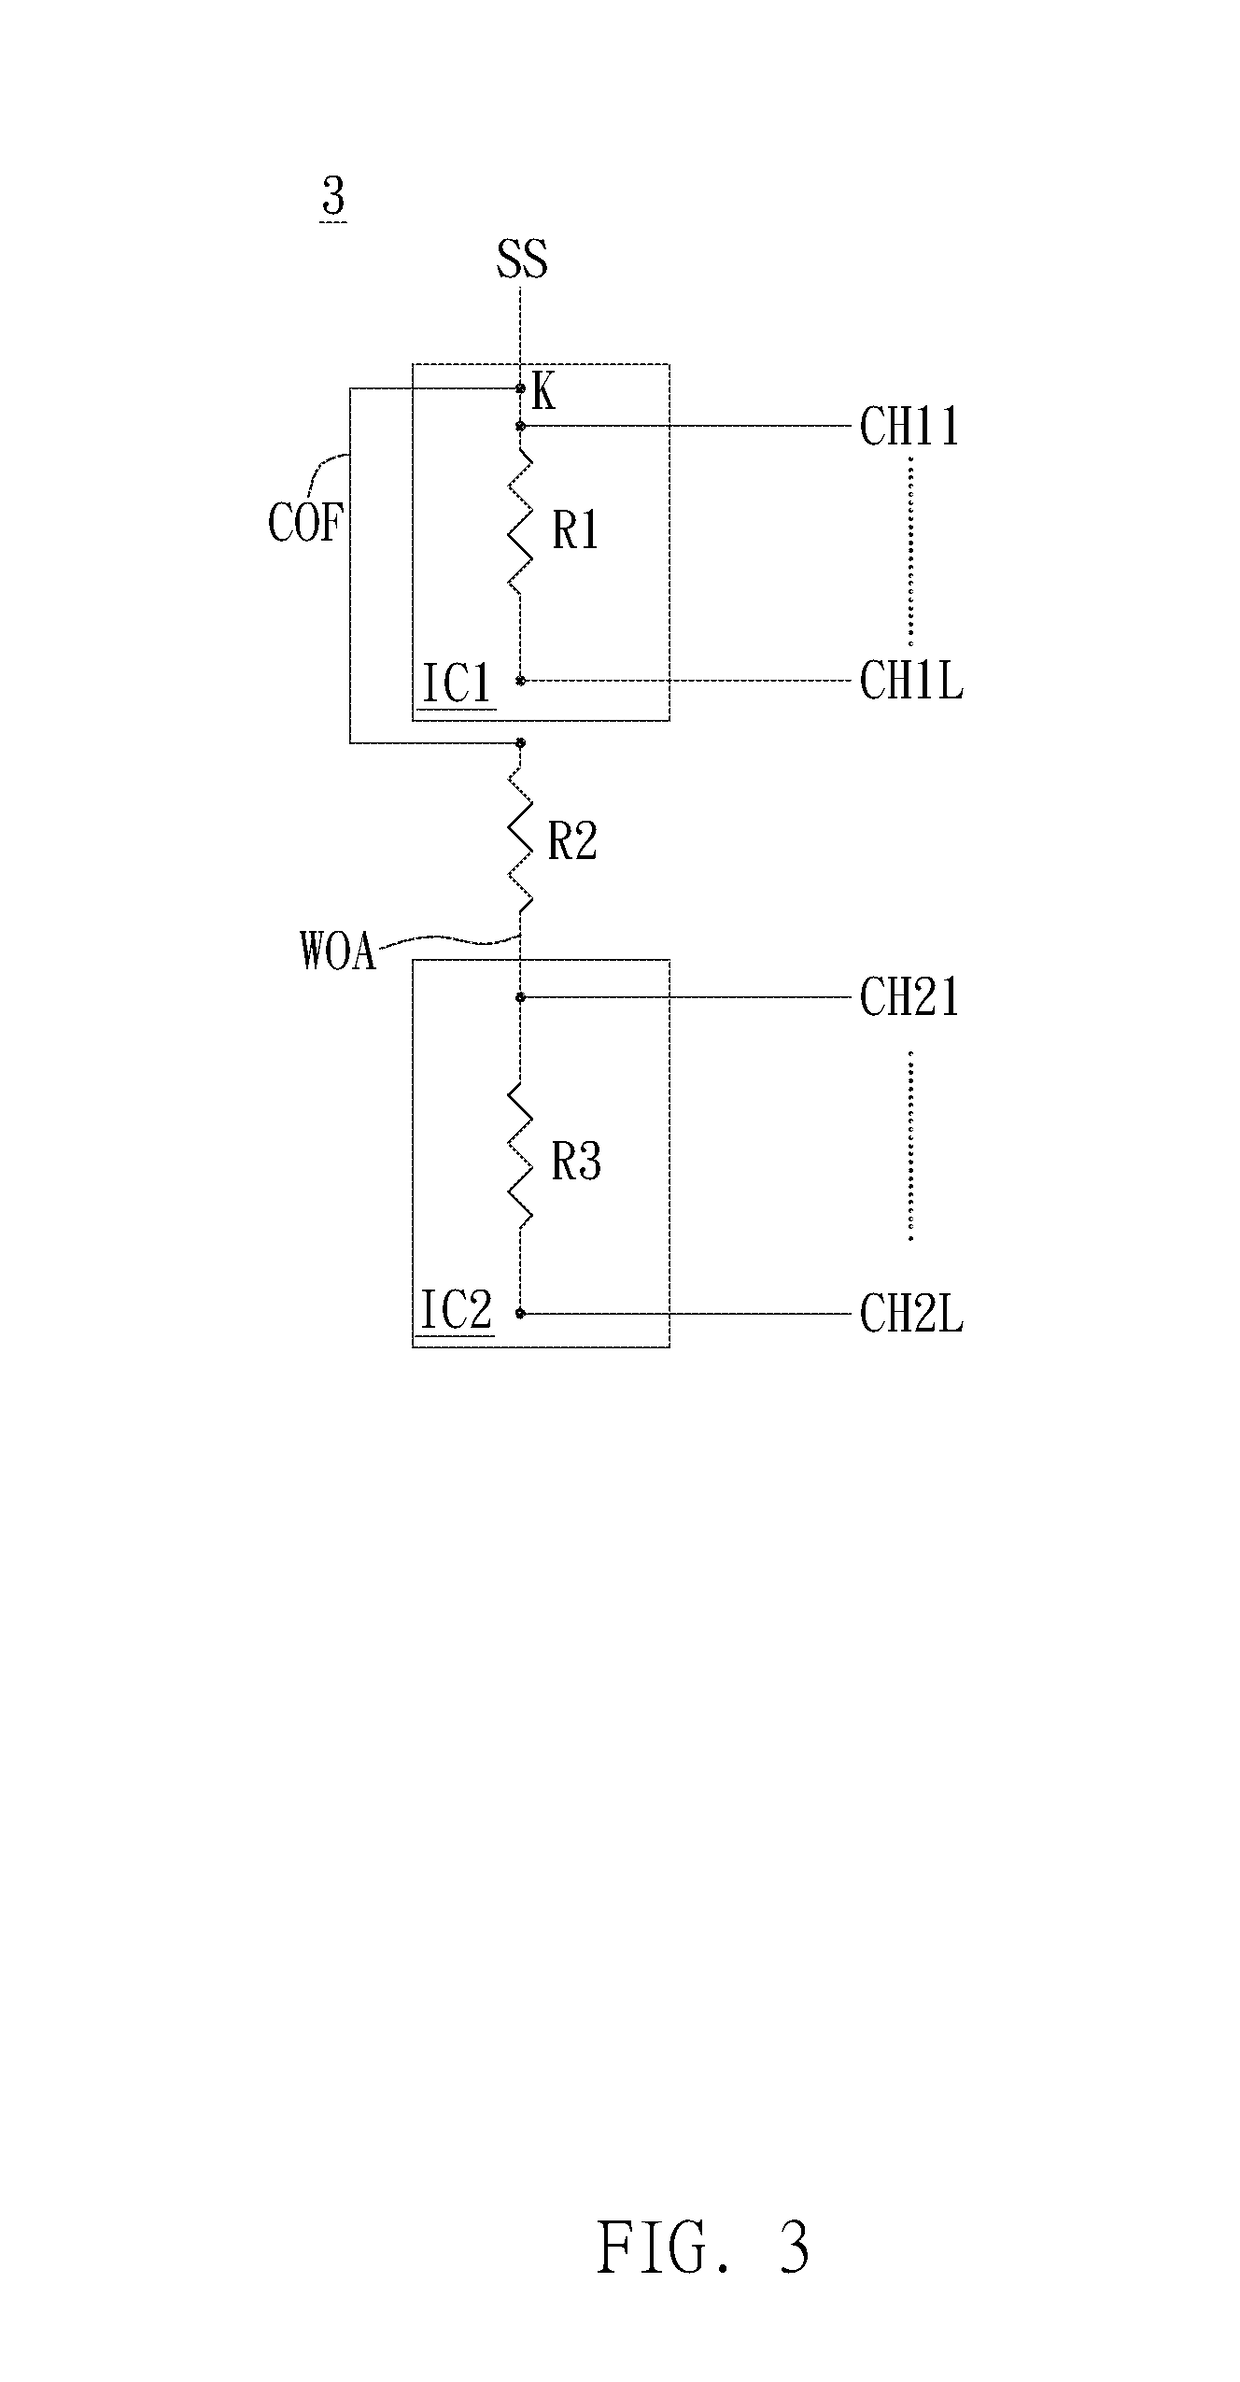 Driving circuit applied to LCD apparatus